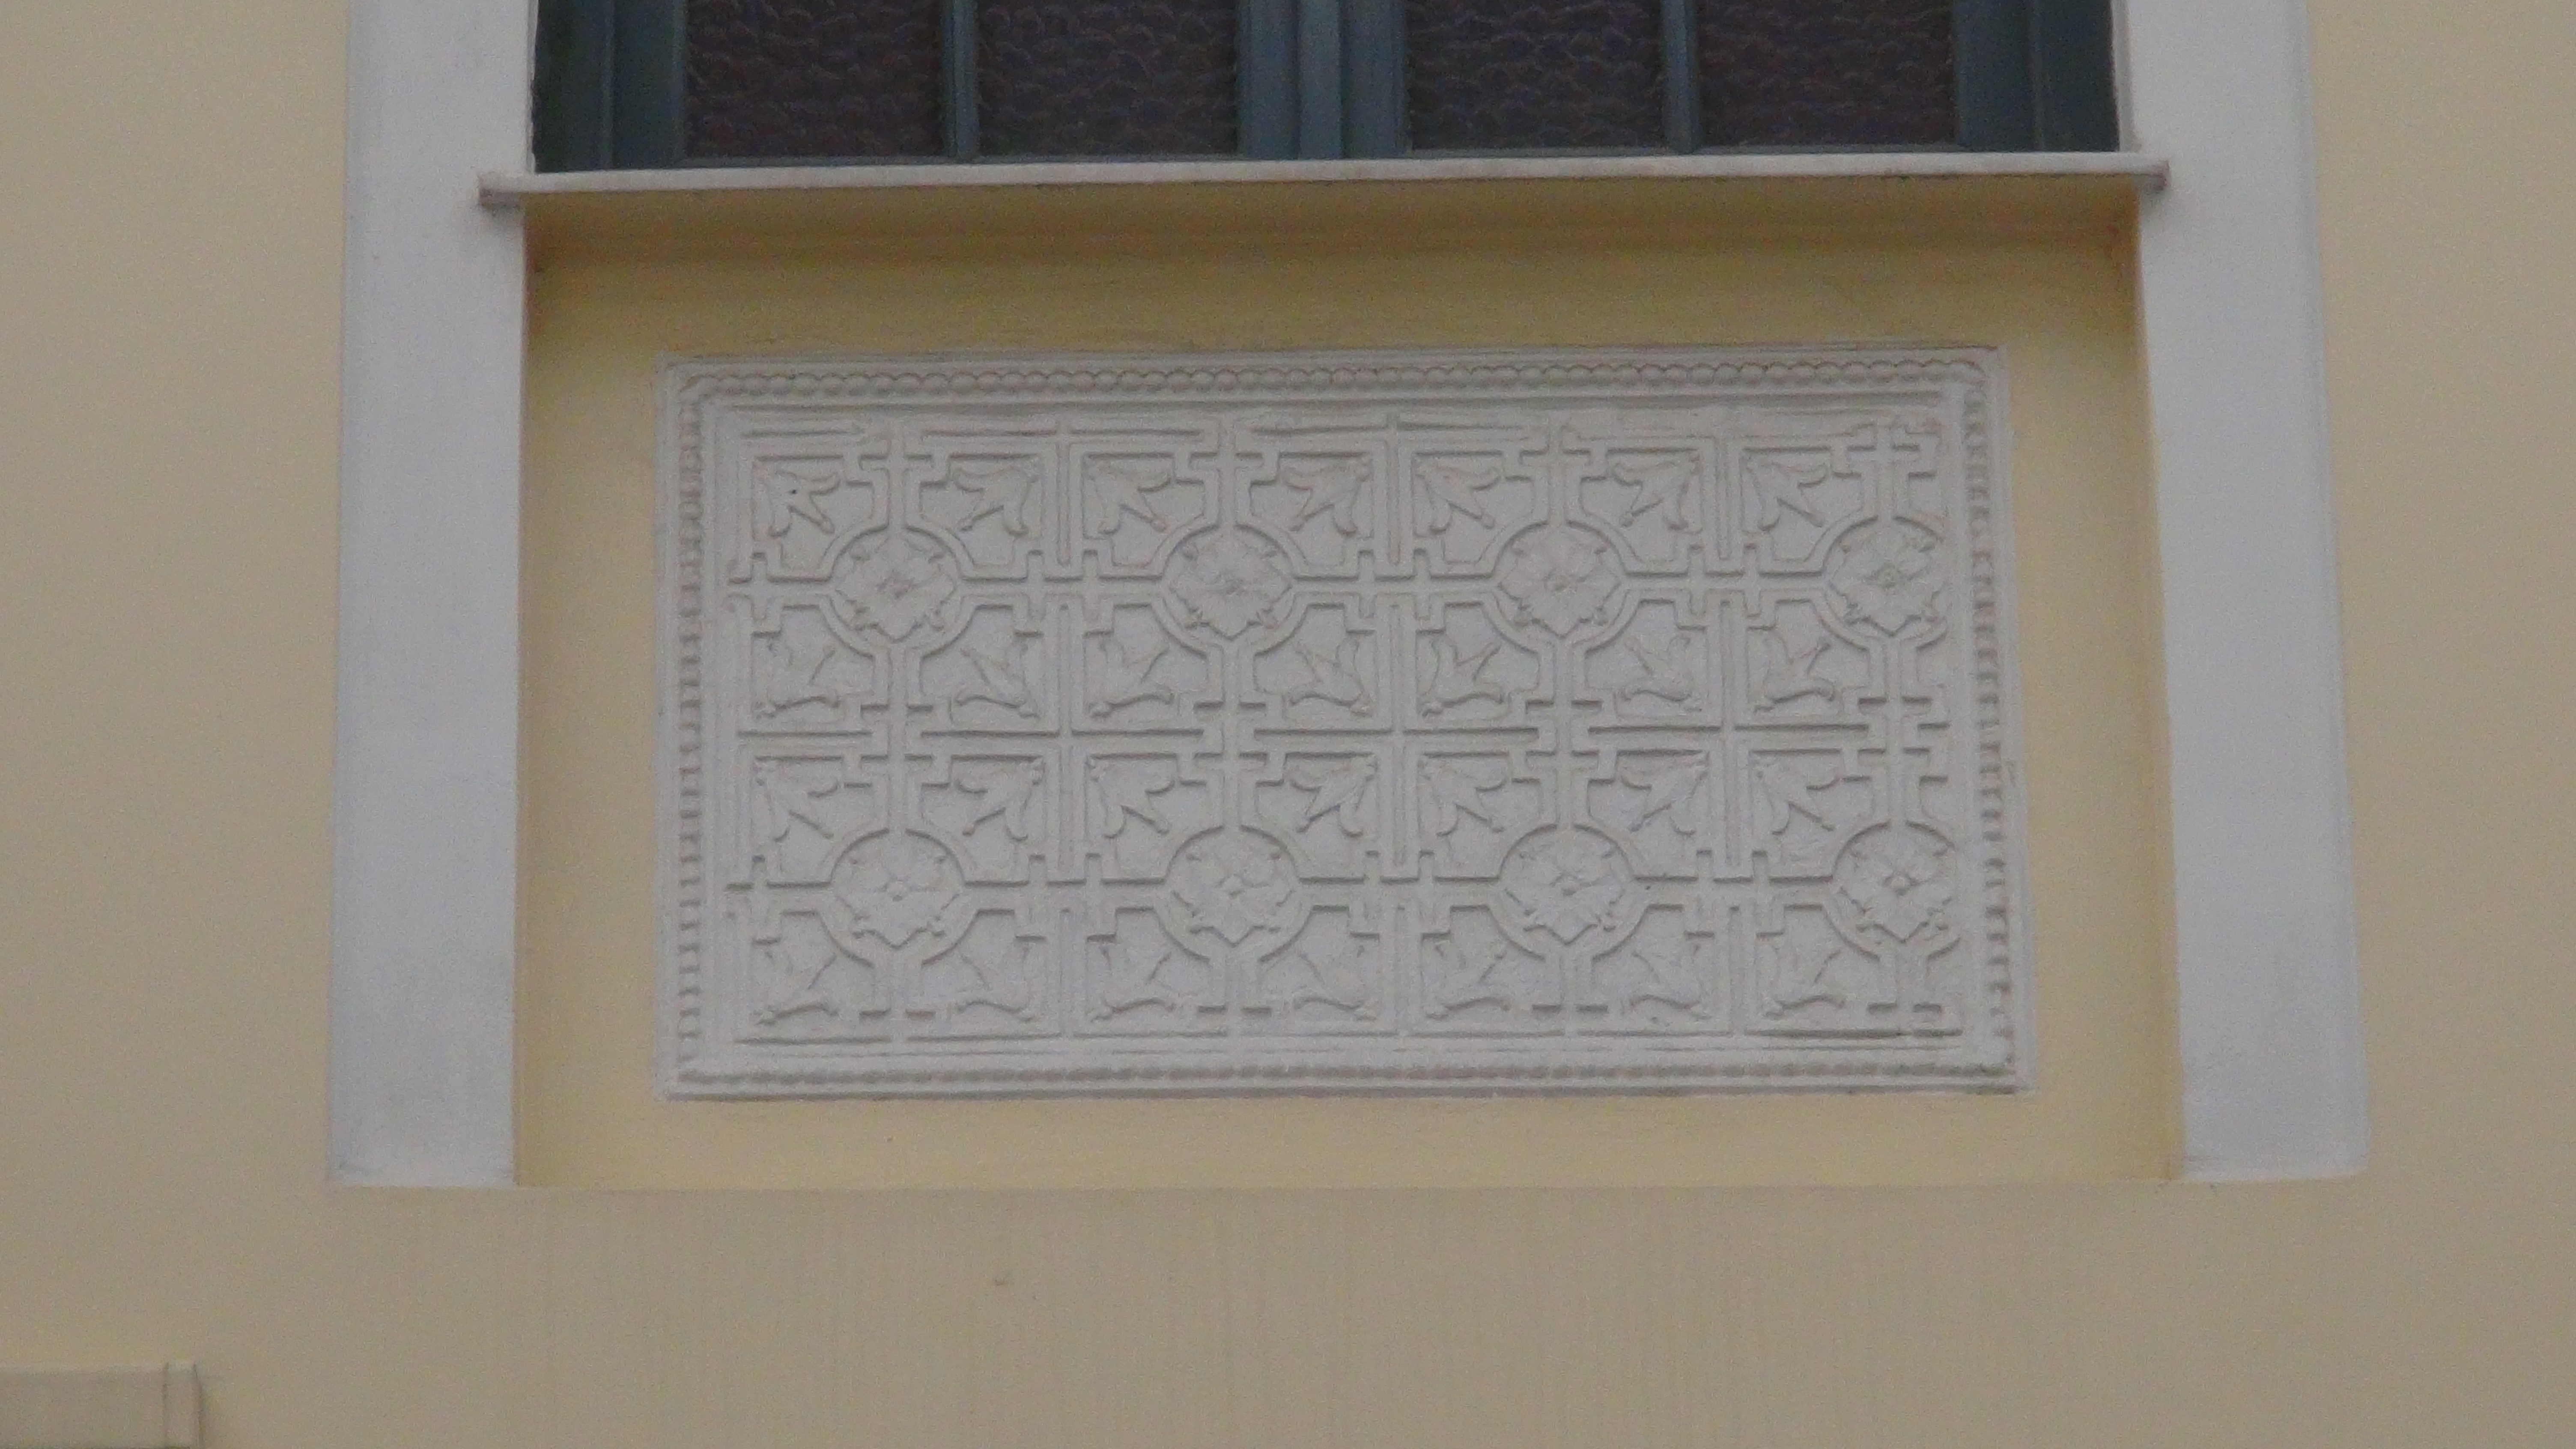 Decorative engraved plaque under the window of the upper floor at the side of the building